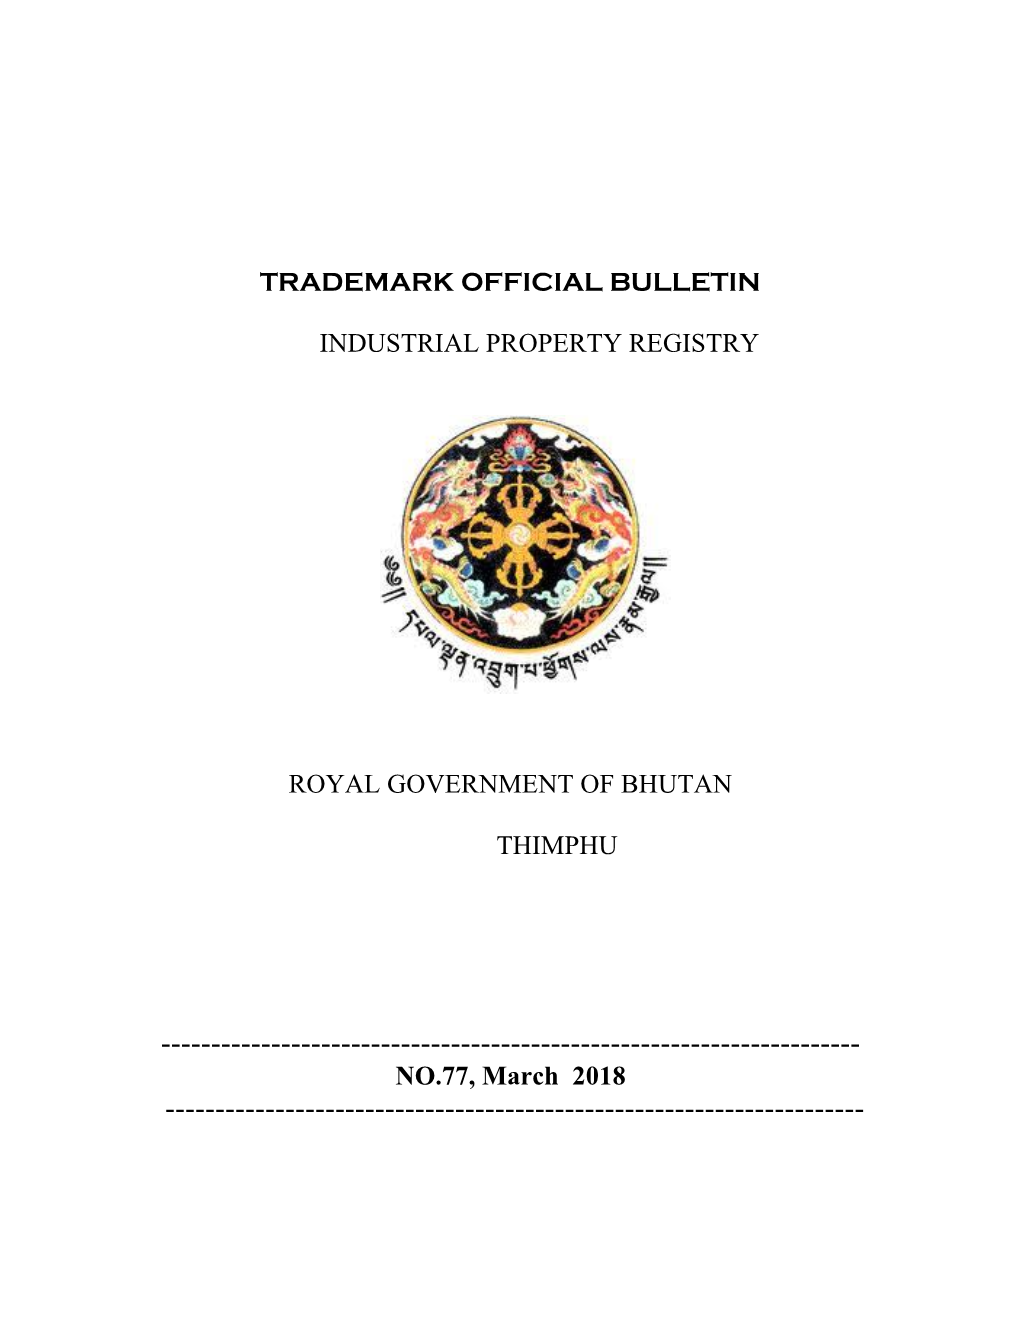 Trademark Official Bulletin Industrial Property Registry Royal Government